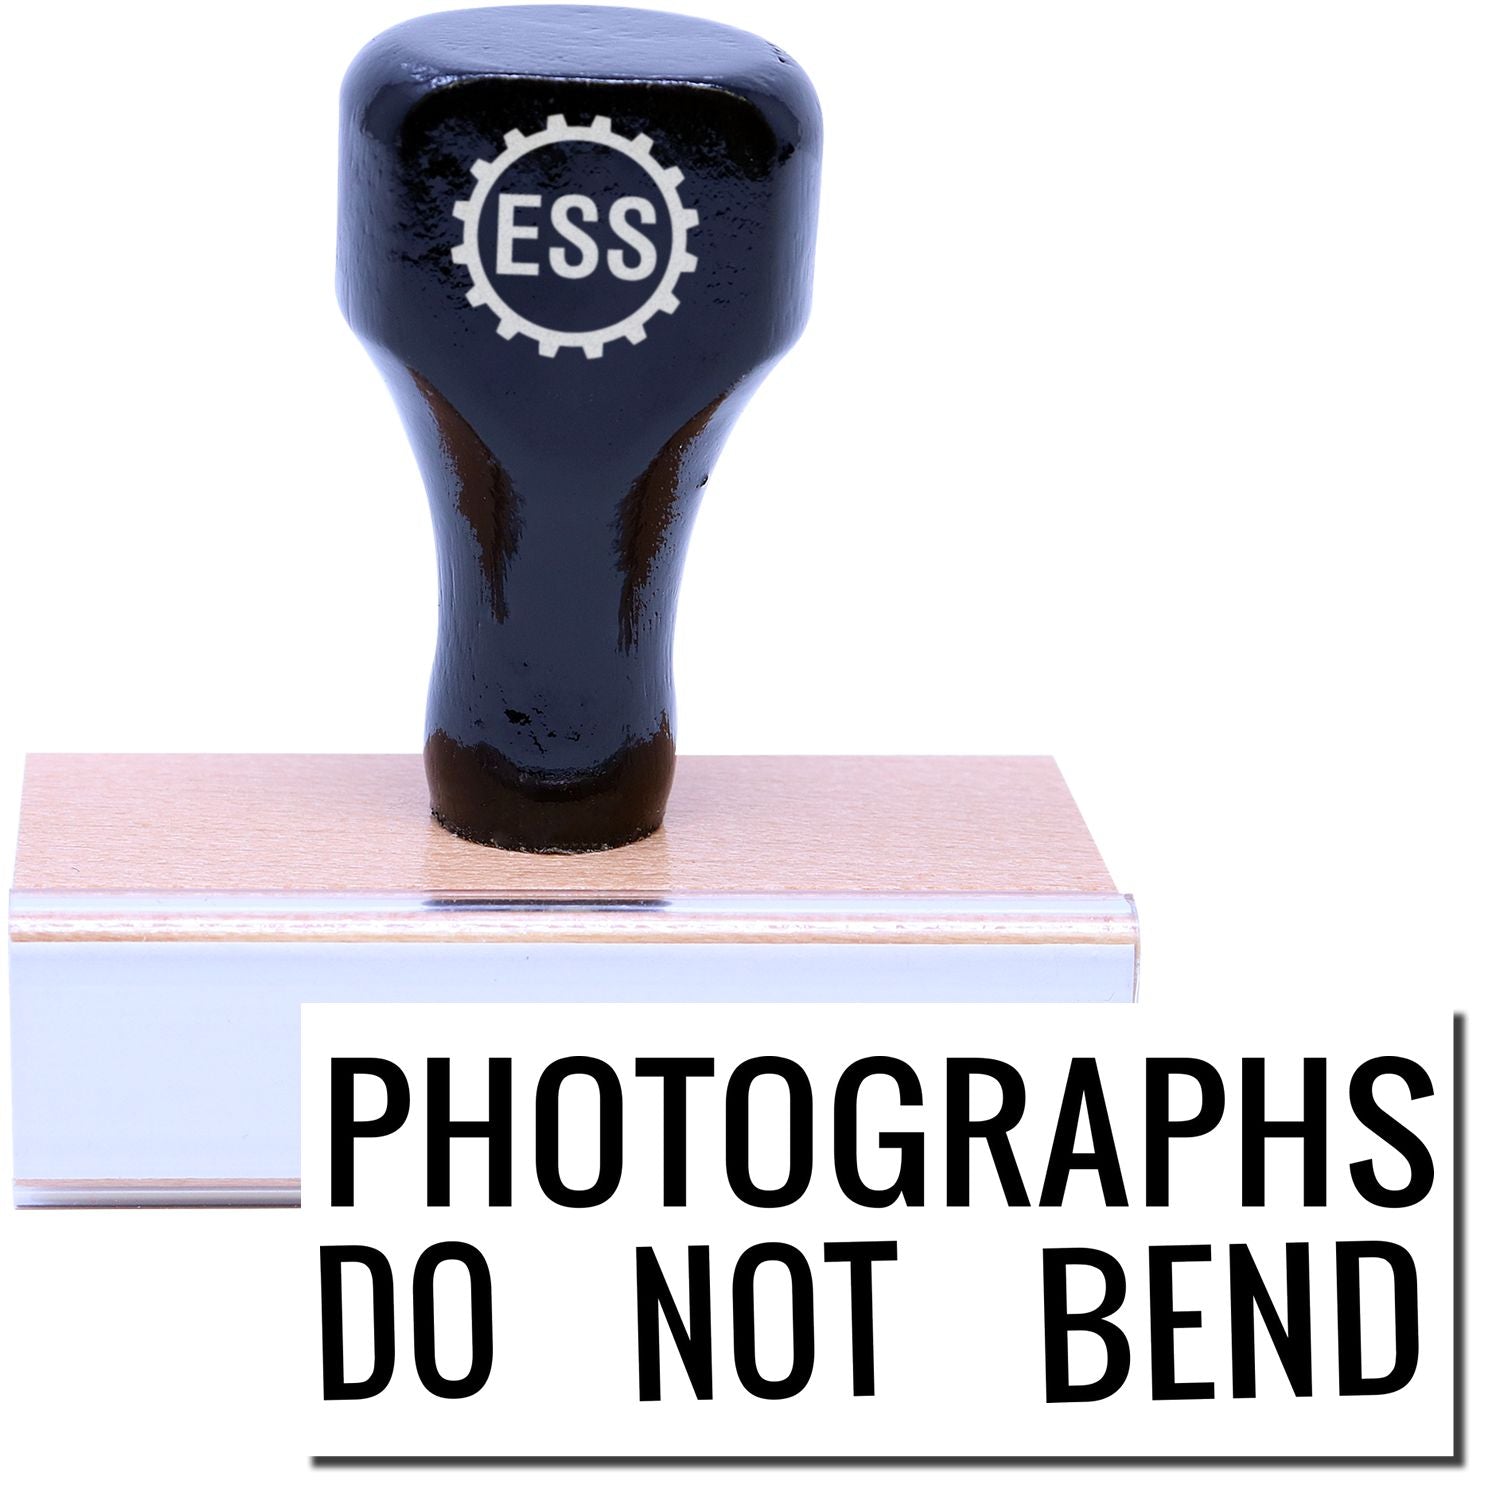 A stock office rubber stamp with a stamped image showing how the text "PHOTOGRAPHS DO NOT BEND" is displayed after stamping.